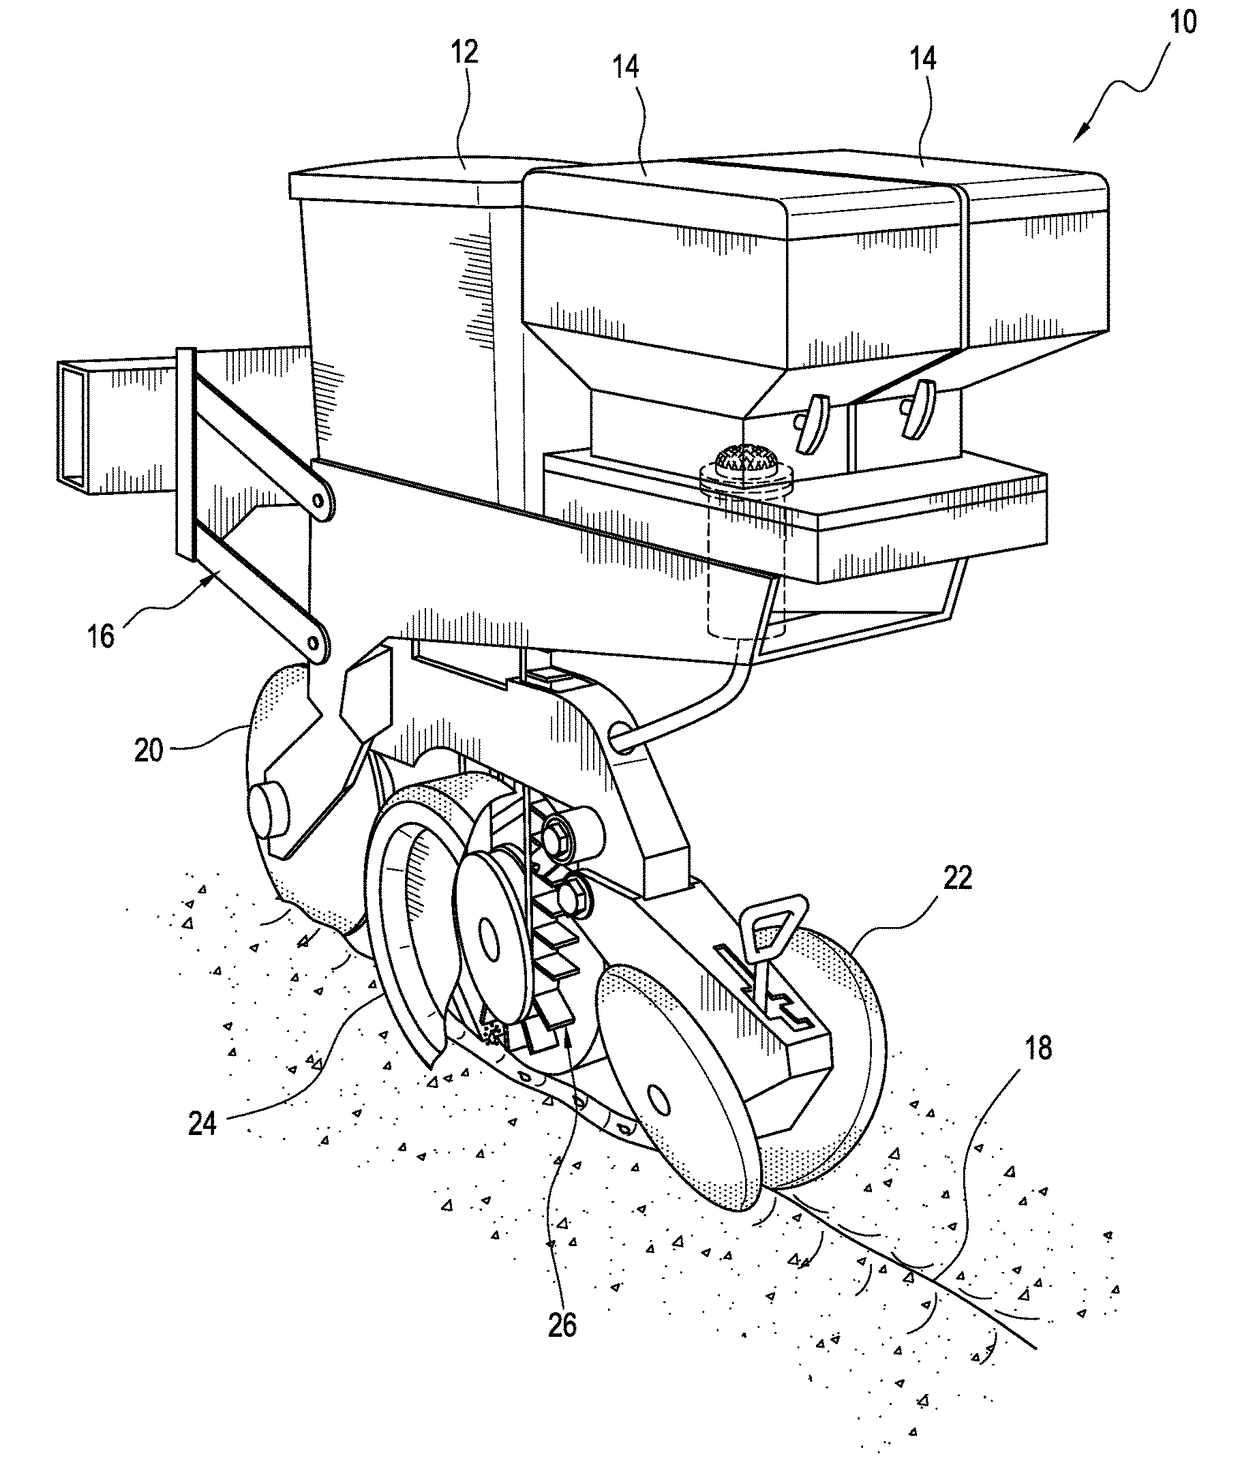 Electronically pulsing agricultural product with seed utilizing seed transport mechanism